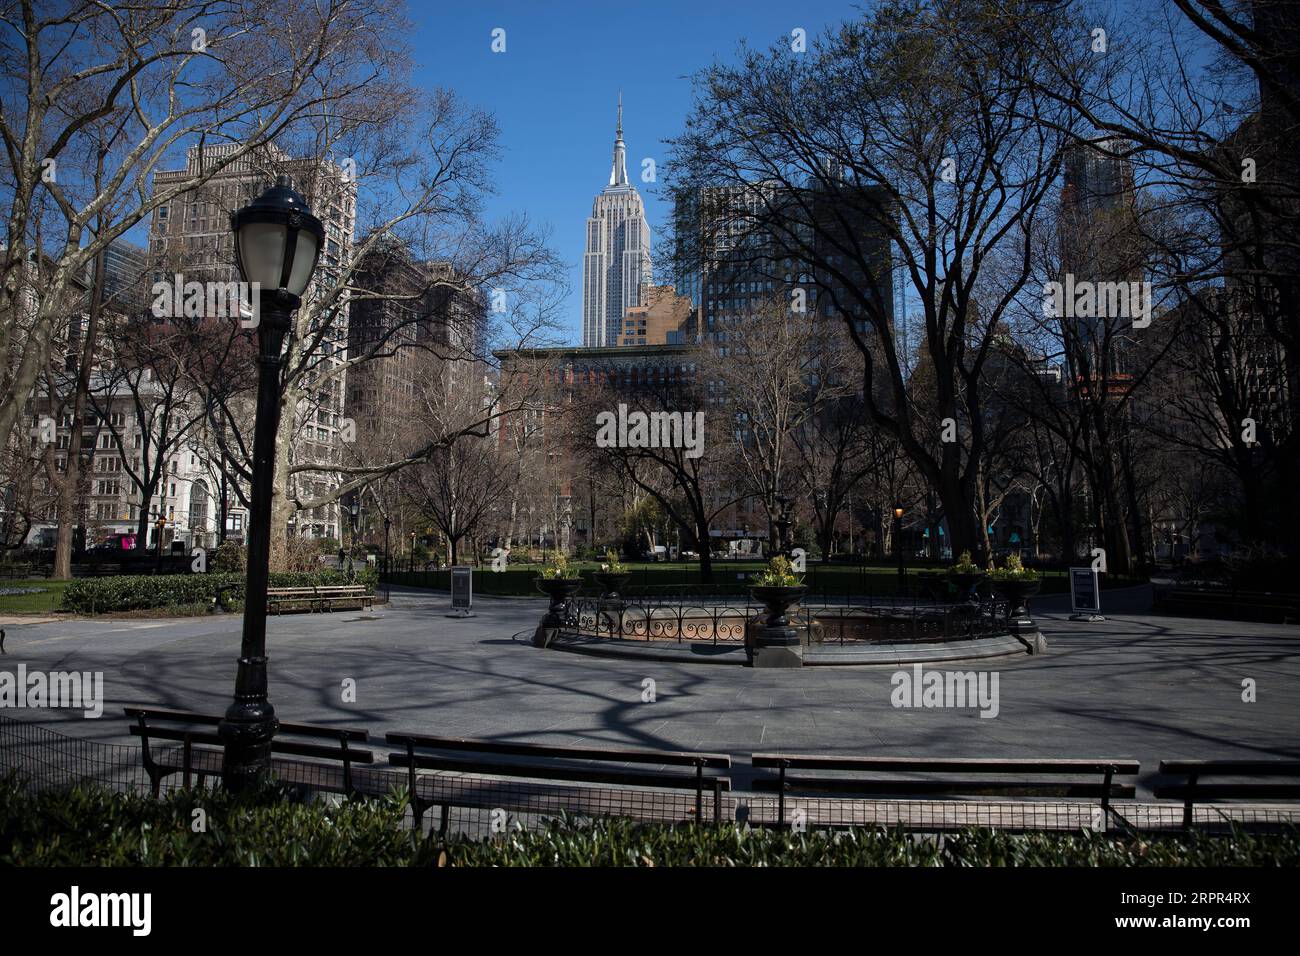 200327 -- NEW YORK, March 27, 2020 -- Madison Square Park is seen empty in New York, the United States, March 26, 2020. The United States reported 82,404 confirmed COVID-19 cases as of 6 p.m. U.S. Eastern Time on Thursday 2200 GMT, according to the Center for Systems Science and Engineering CSSE at Johns Hopkins University. The United States has surpassed China to become the country with most COVID-19 cases in the world, according to the CSSE. Photo by Michael Nagle/Xinhua U.S.-NEW YORK-COVID-19-CASES MxIchaelNagle/wangying PUBLICATIONxNOTxINxCHN Stock Photo